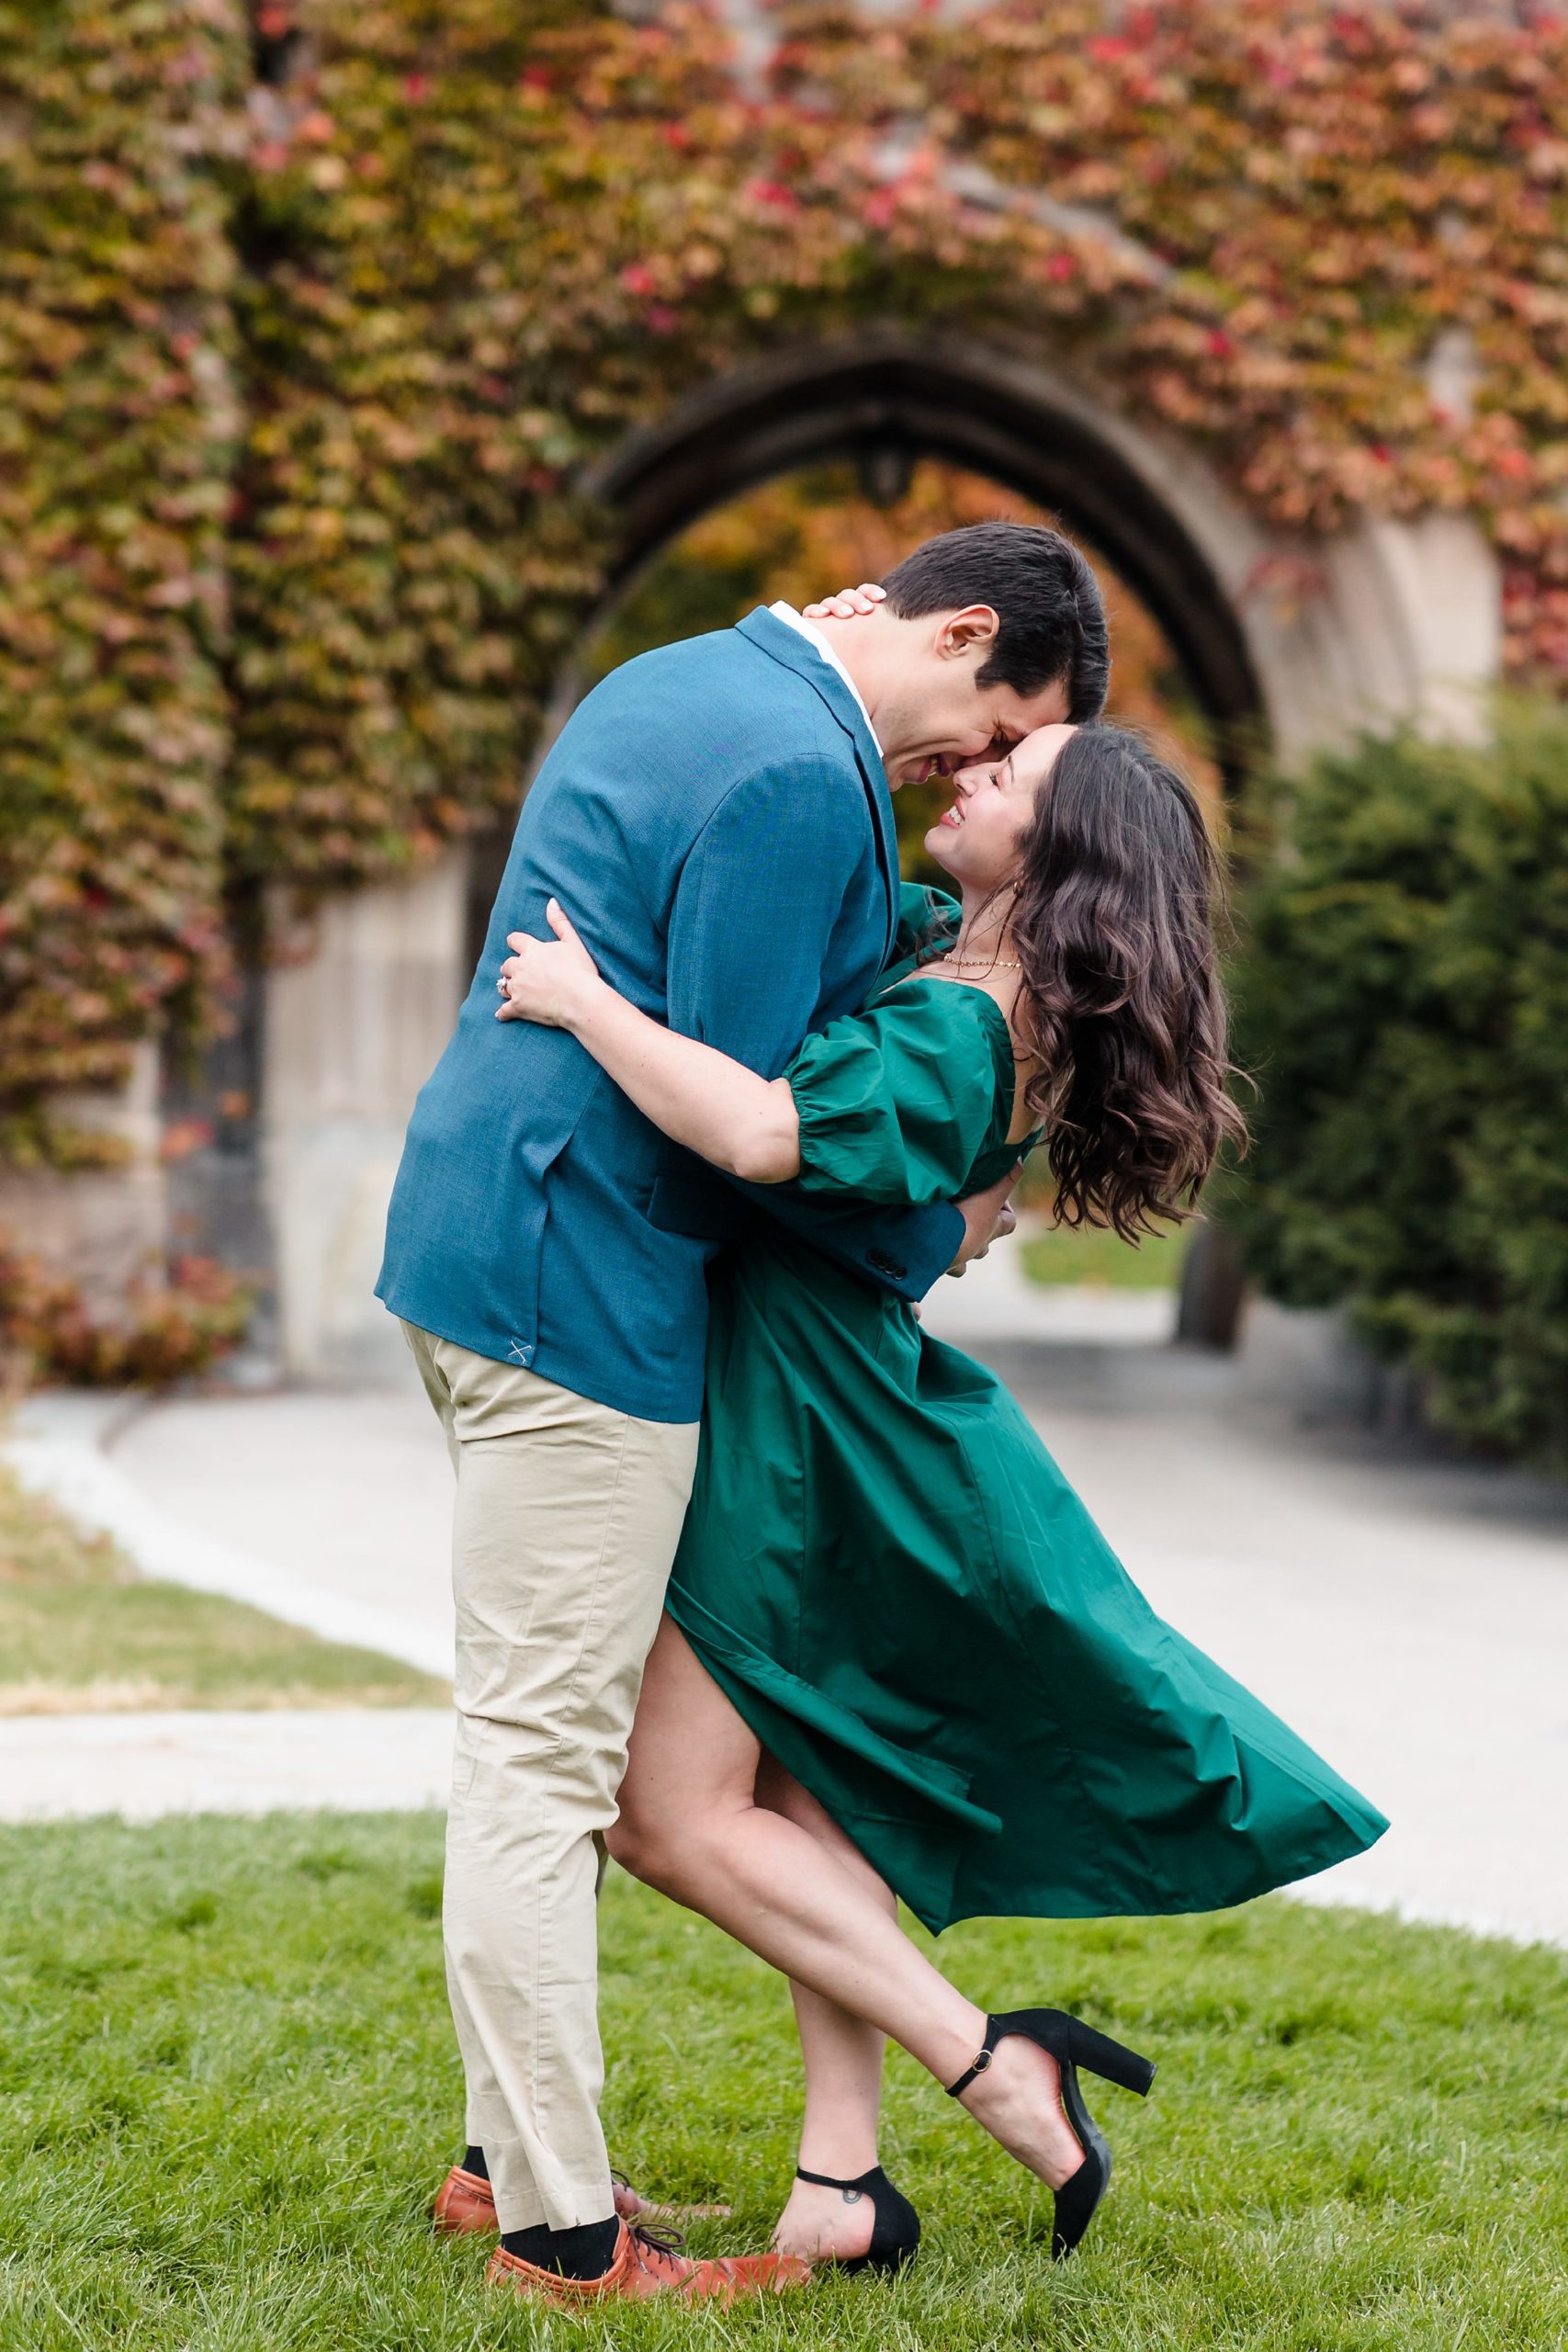 Couple embrace during their engagement session at the University of Chicago in Chicago, Illinois.